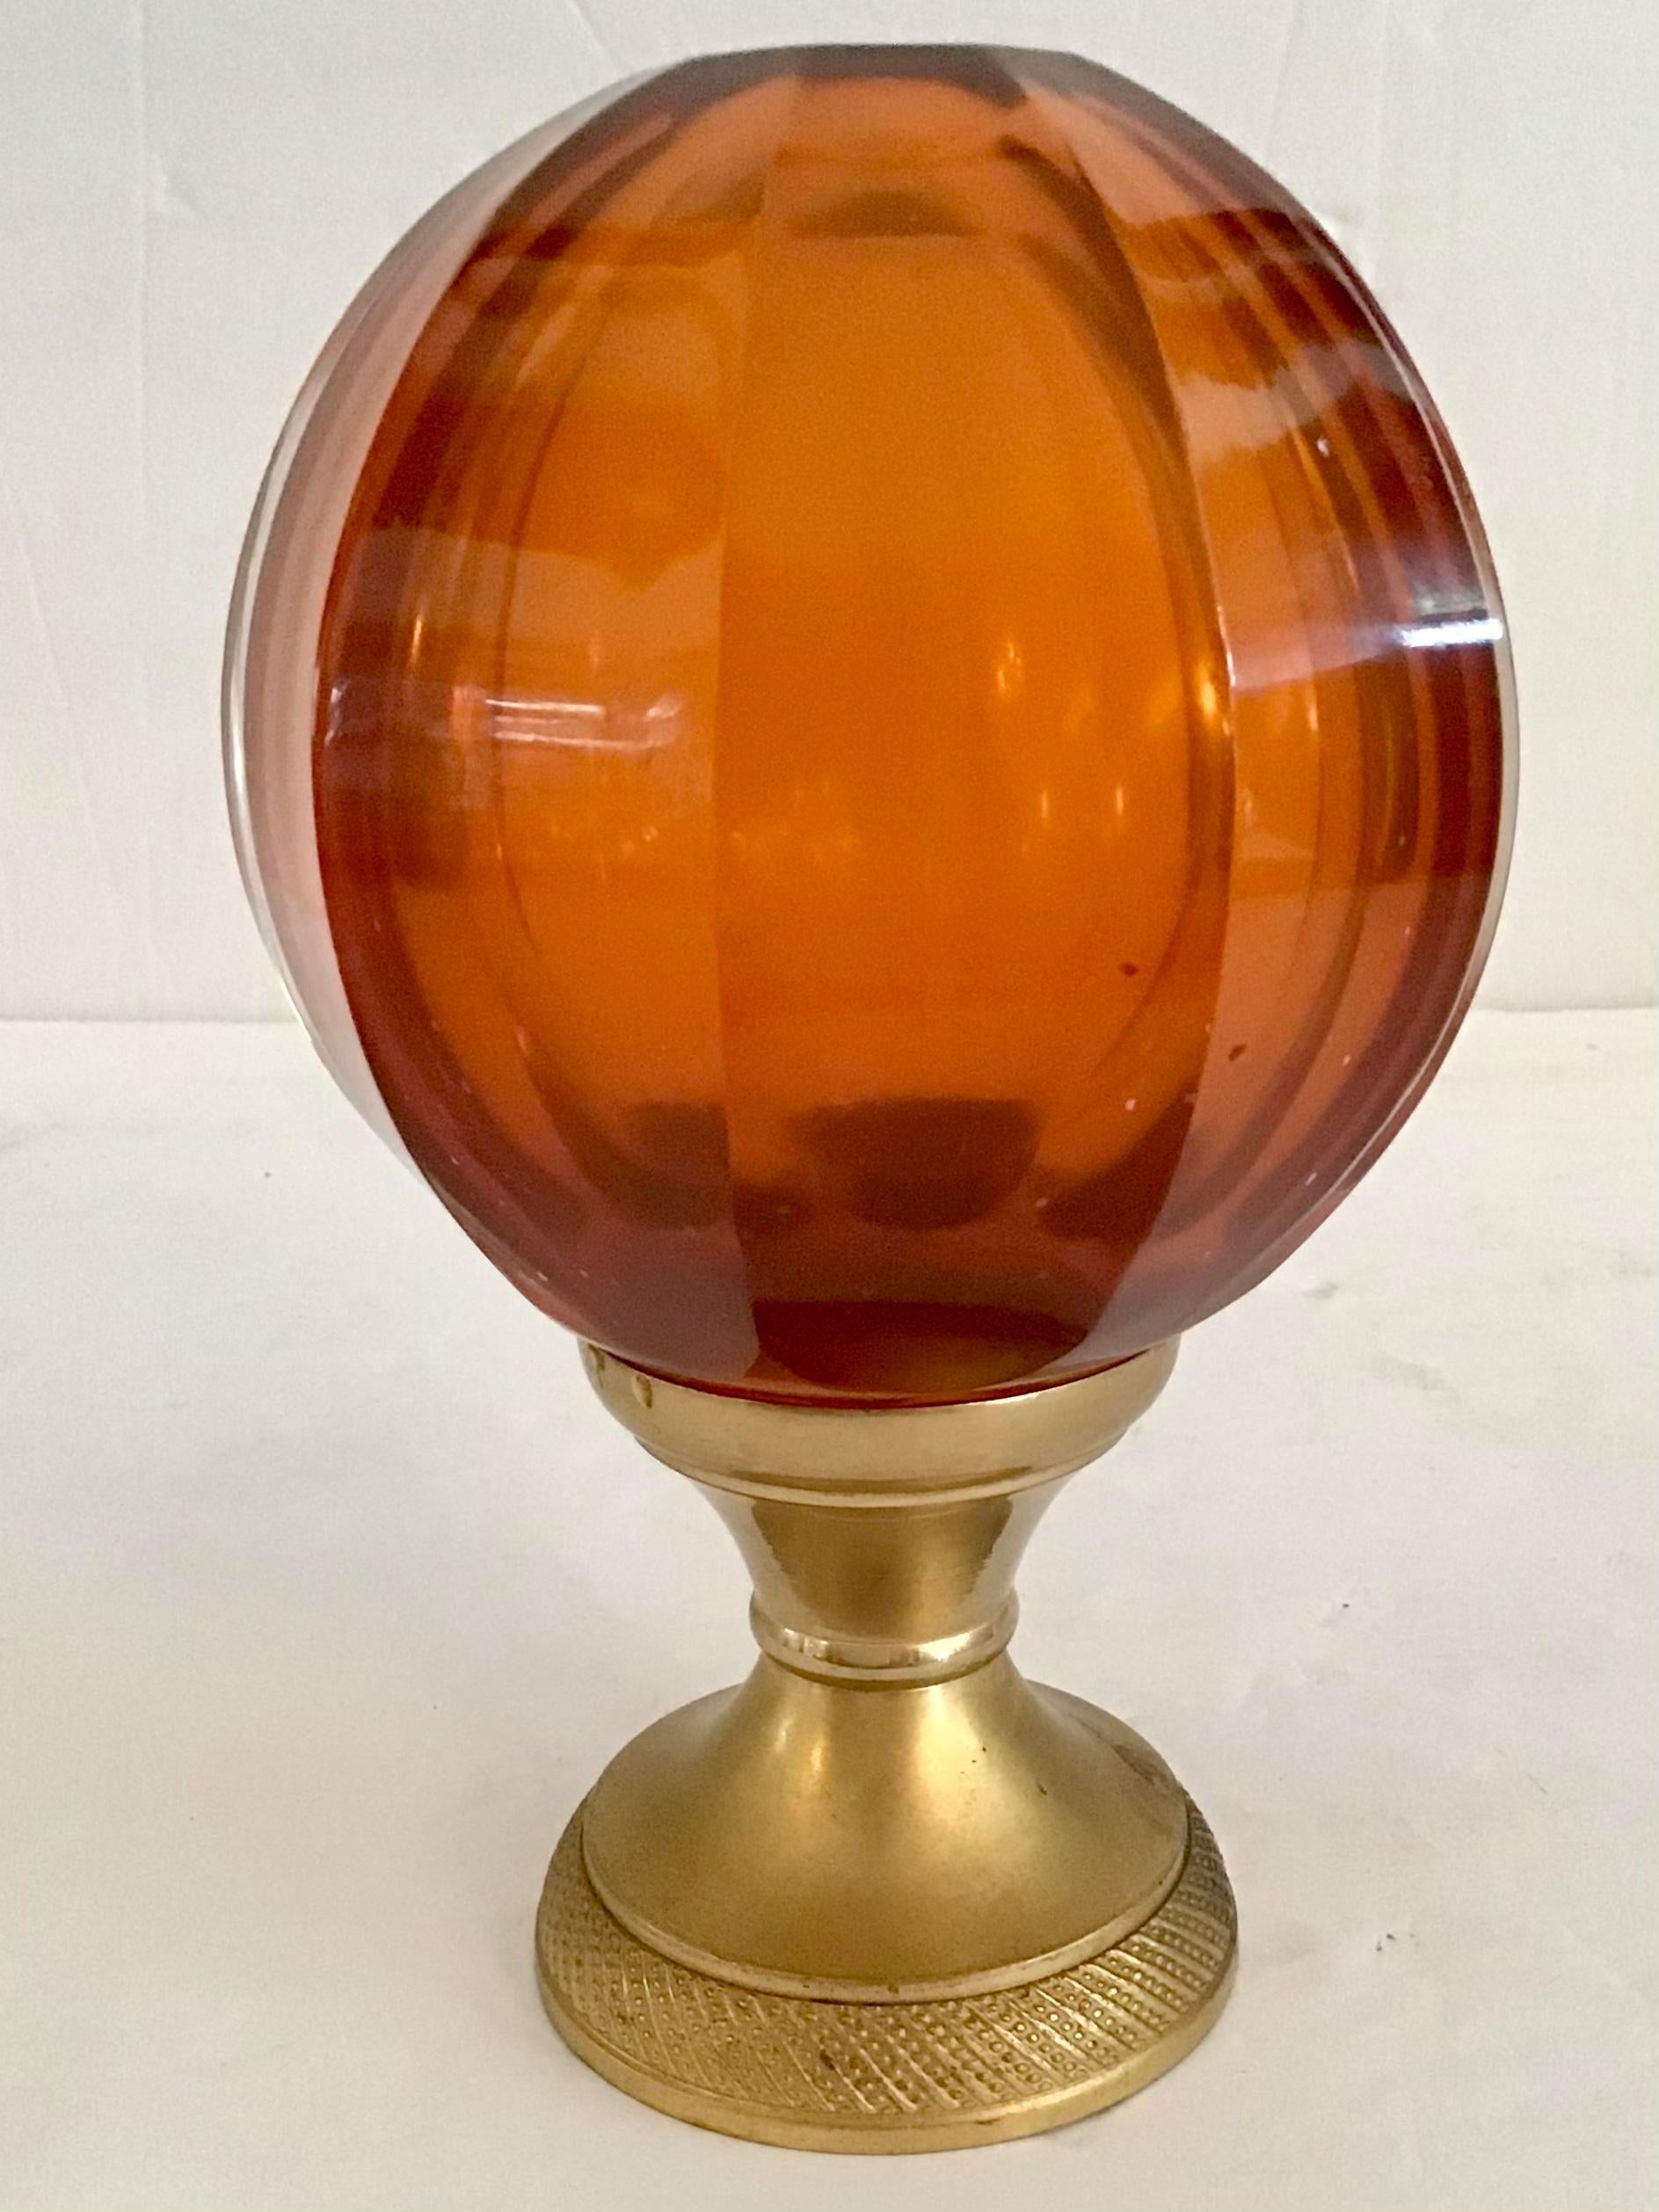 Wonderful French amber glass newel post finial with bronze ormolu. Great home accessory.